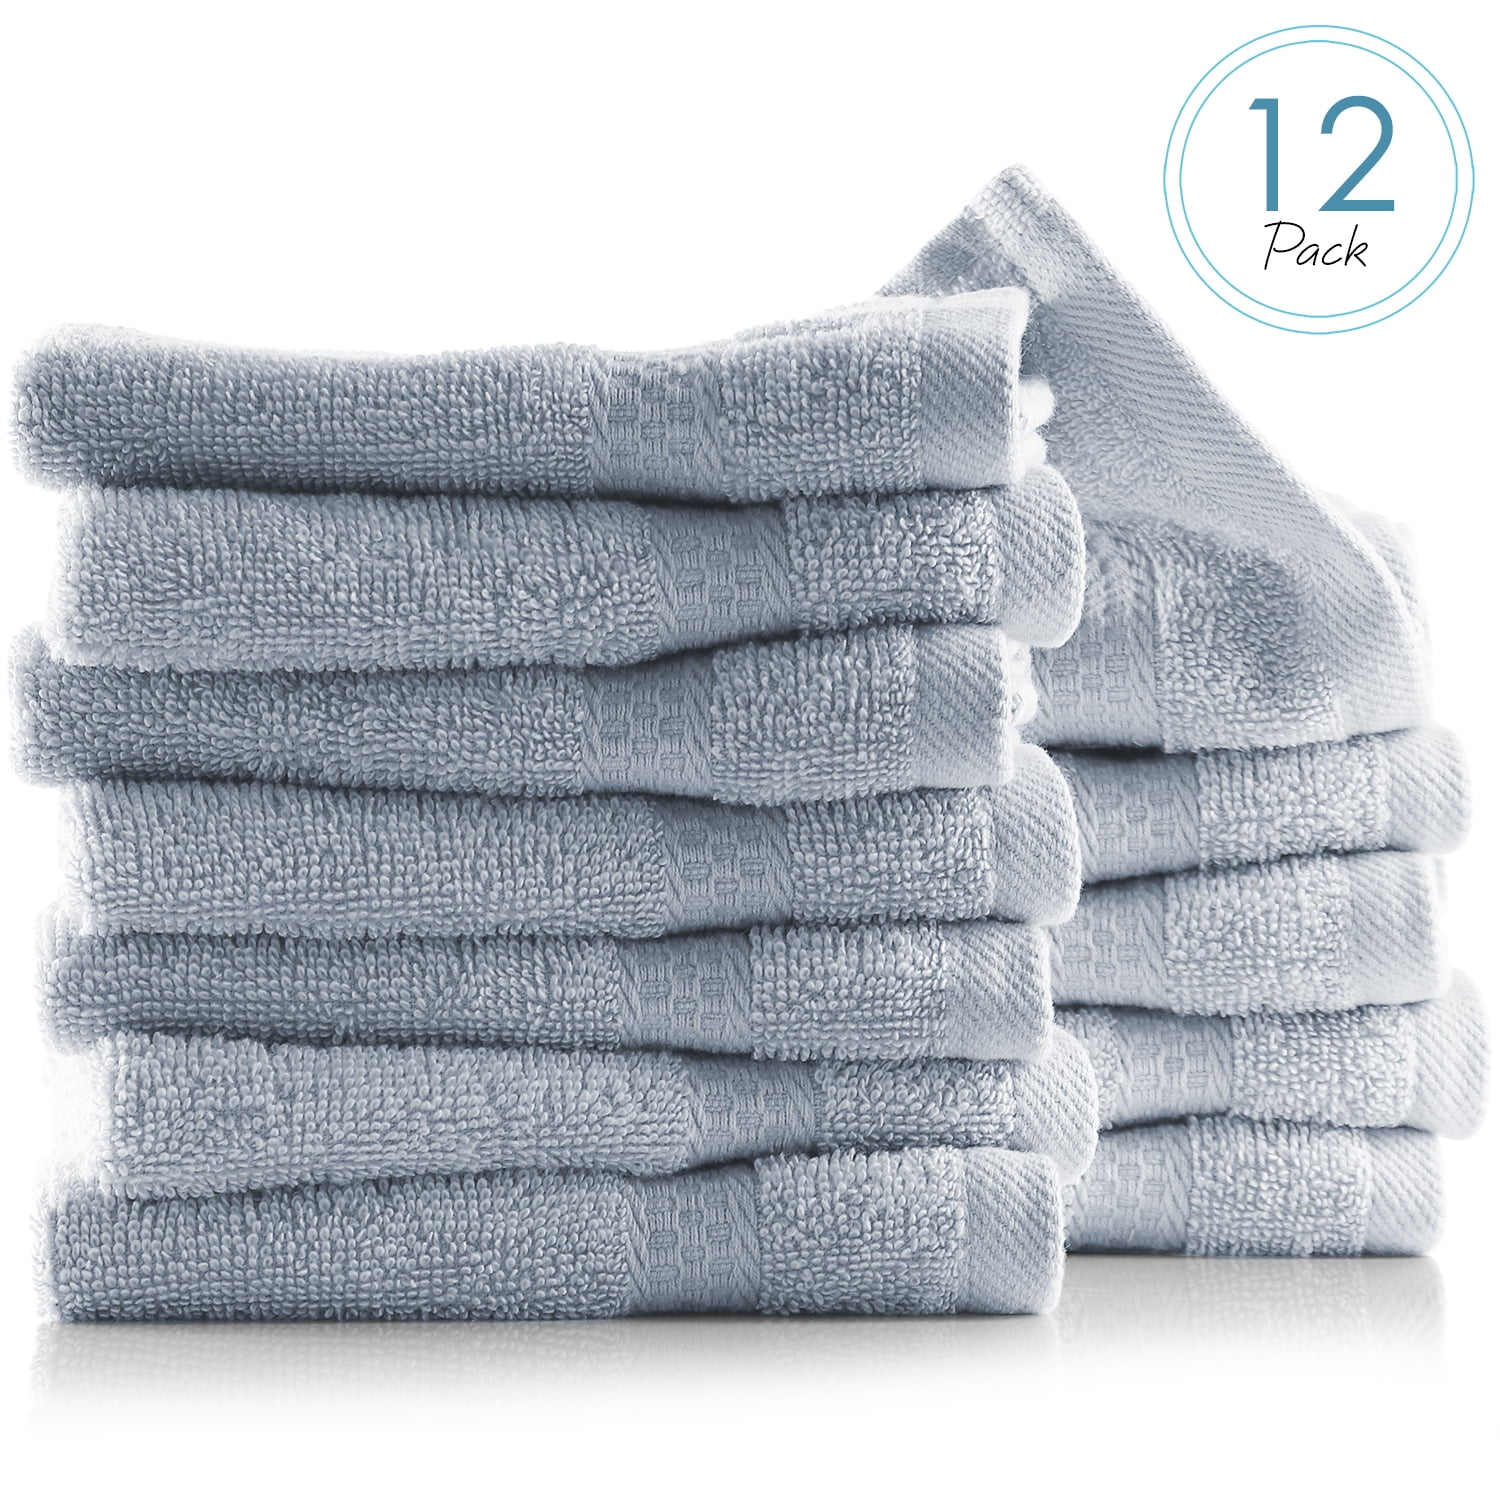 Luxury Face Towels Washcloth Sets Pack 100% Cotton 12"x12" 500 GSM Absorbent 